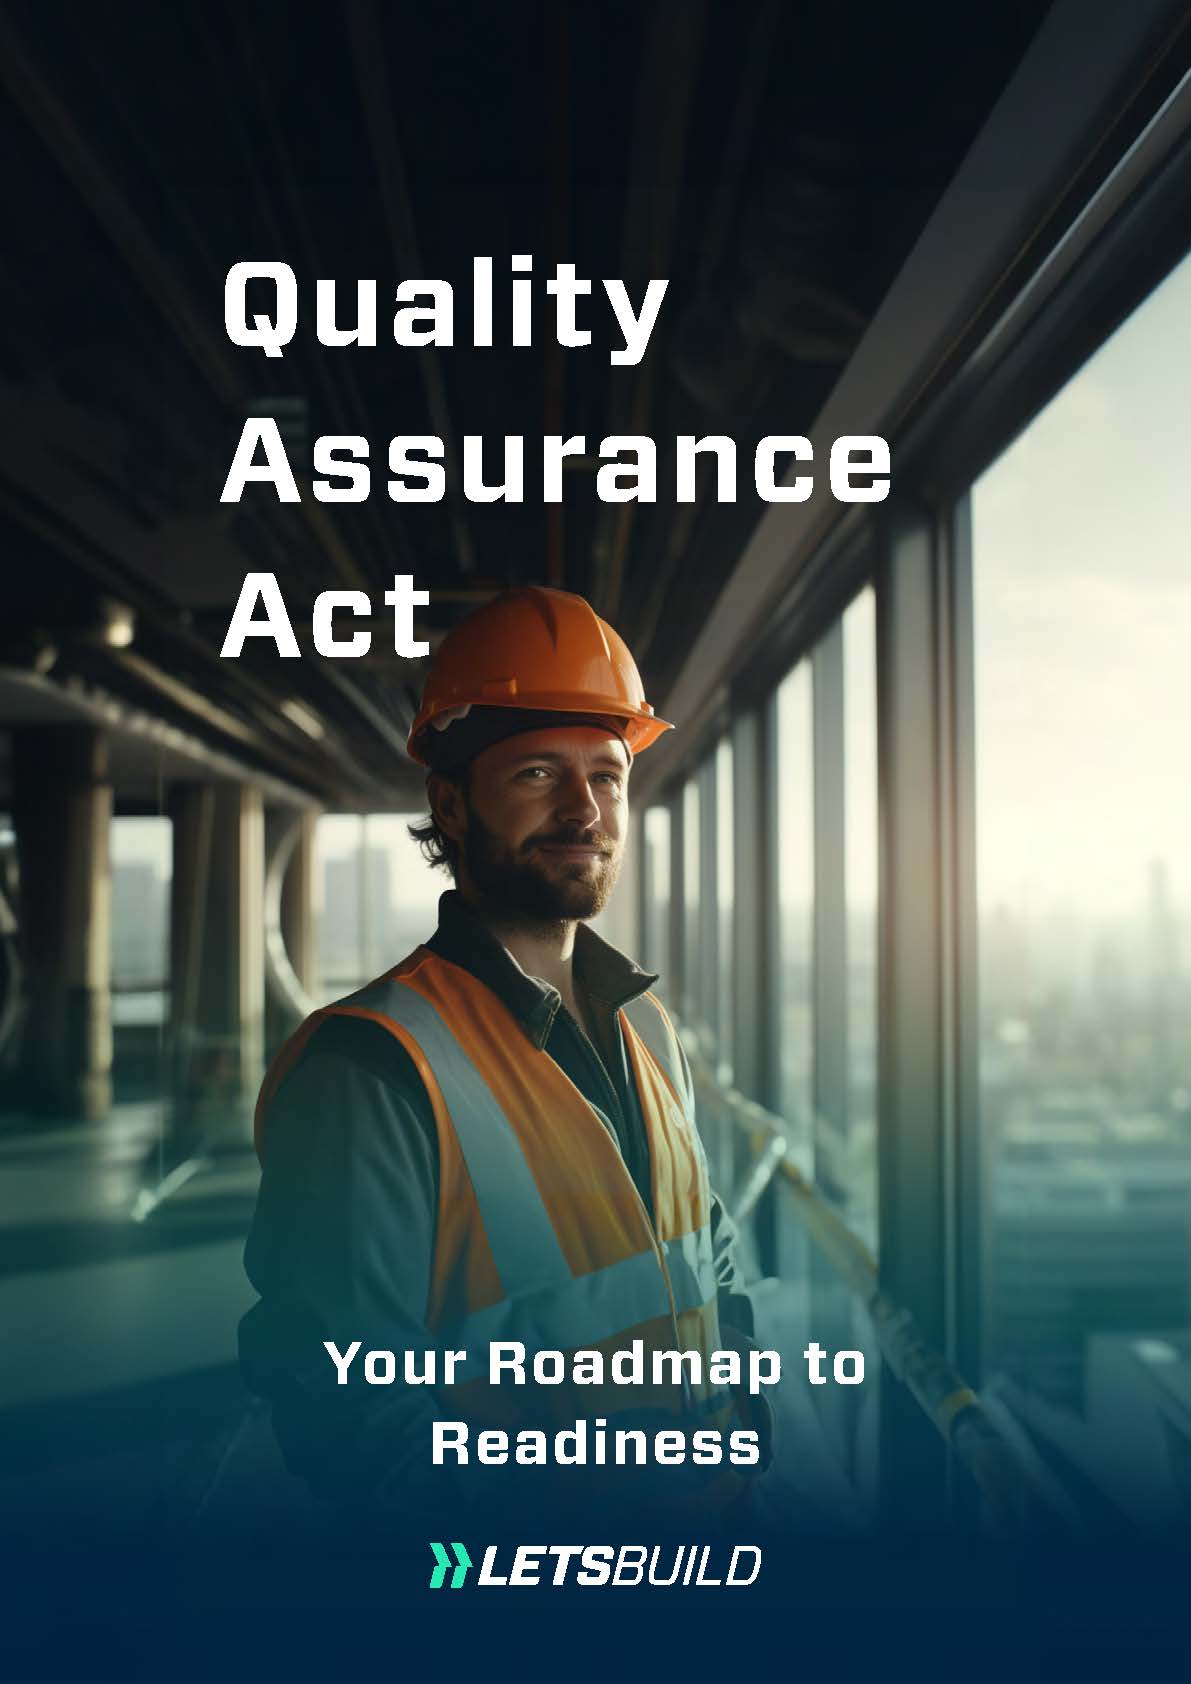 What is Quality Assurance Act and what to do to prepare for the changes cover | LetsBuild